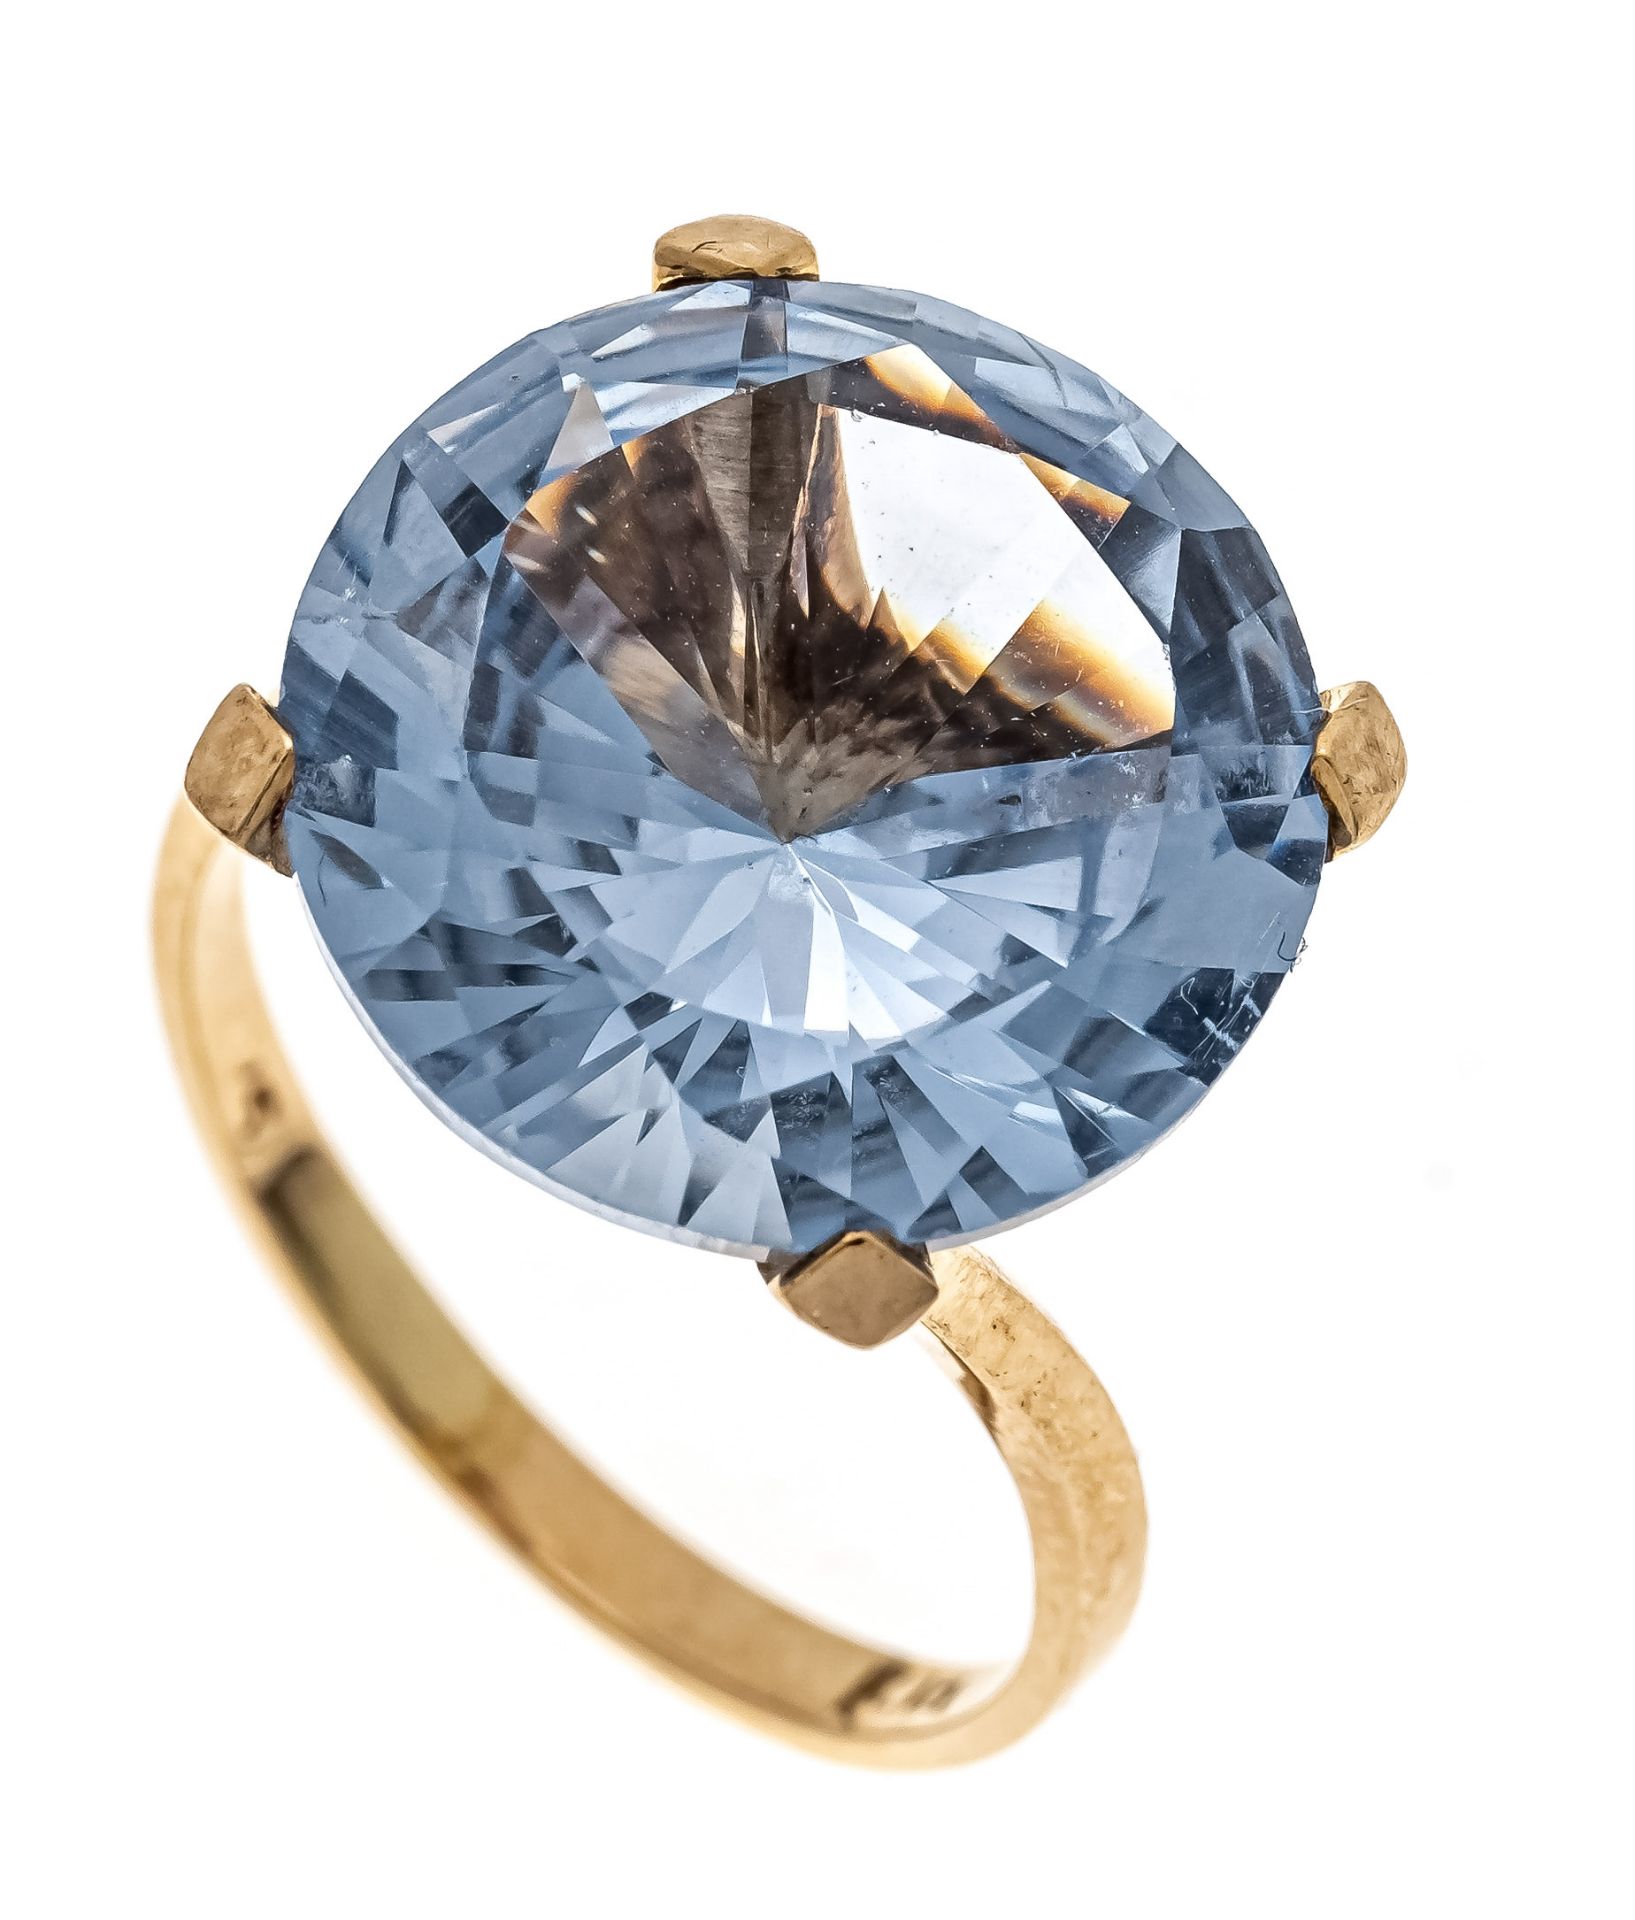 Gemstone ring GG 750/000 with one round faceted synth. spinel 15,10 mm, light blue, eye clean, RG